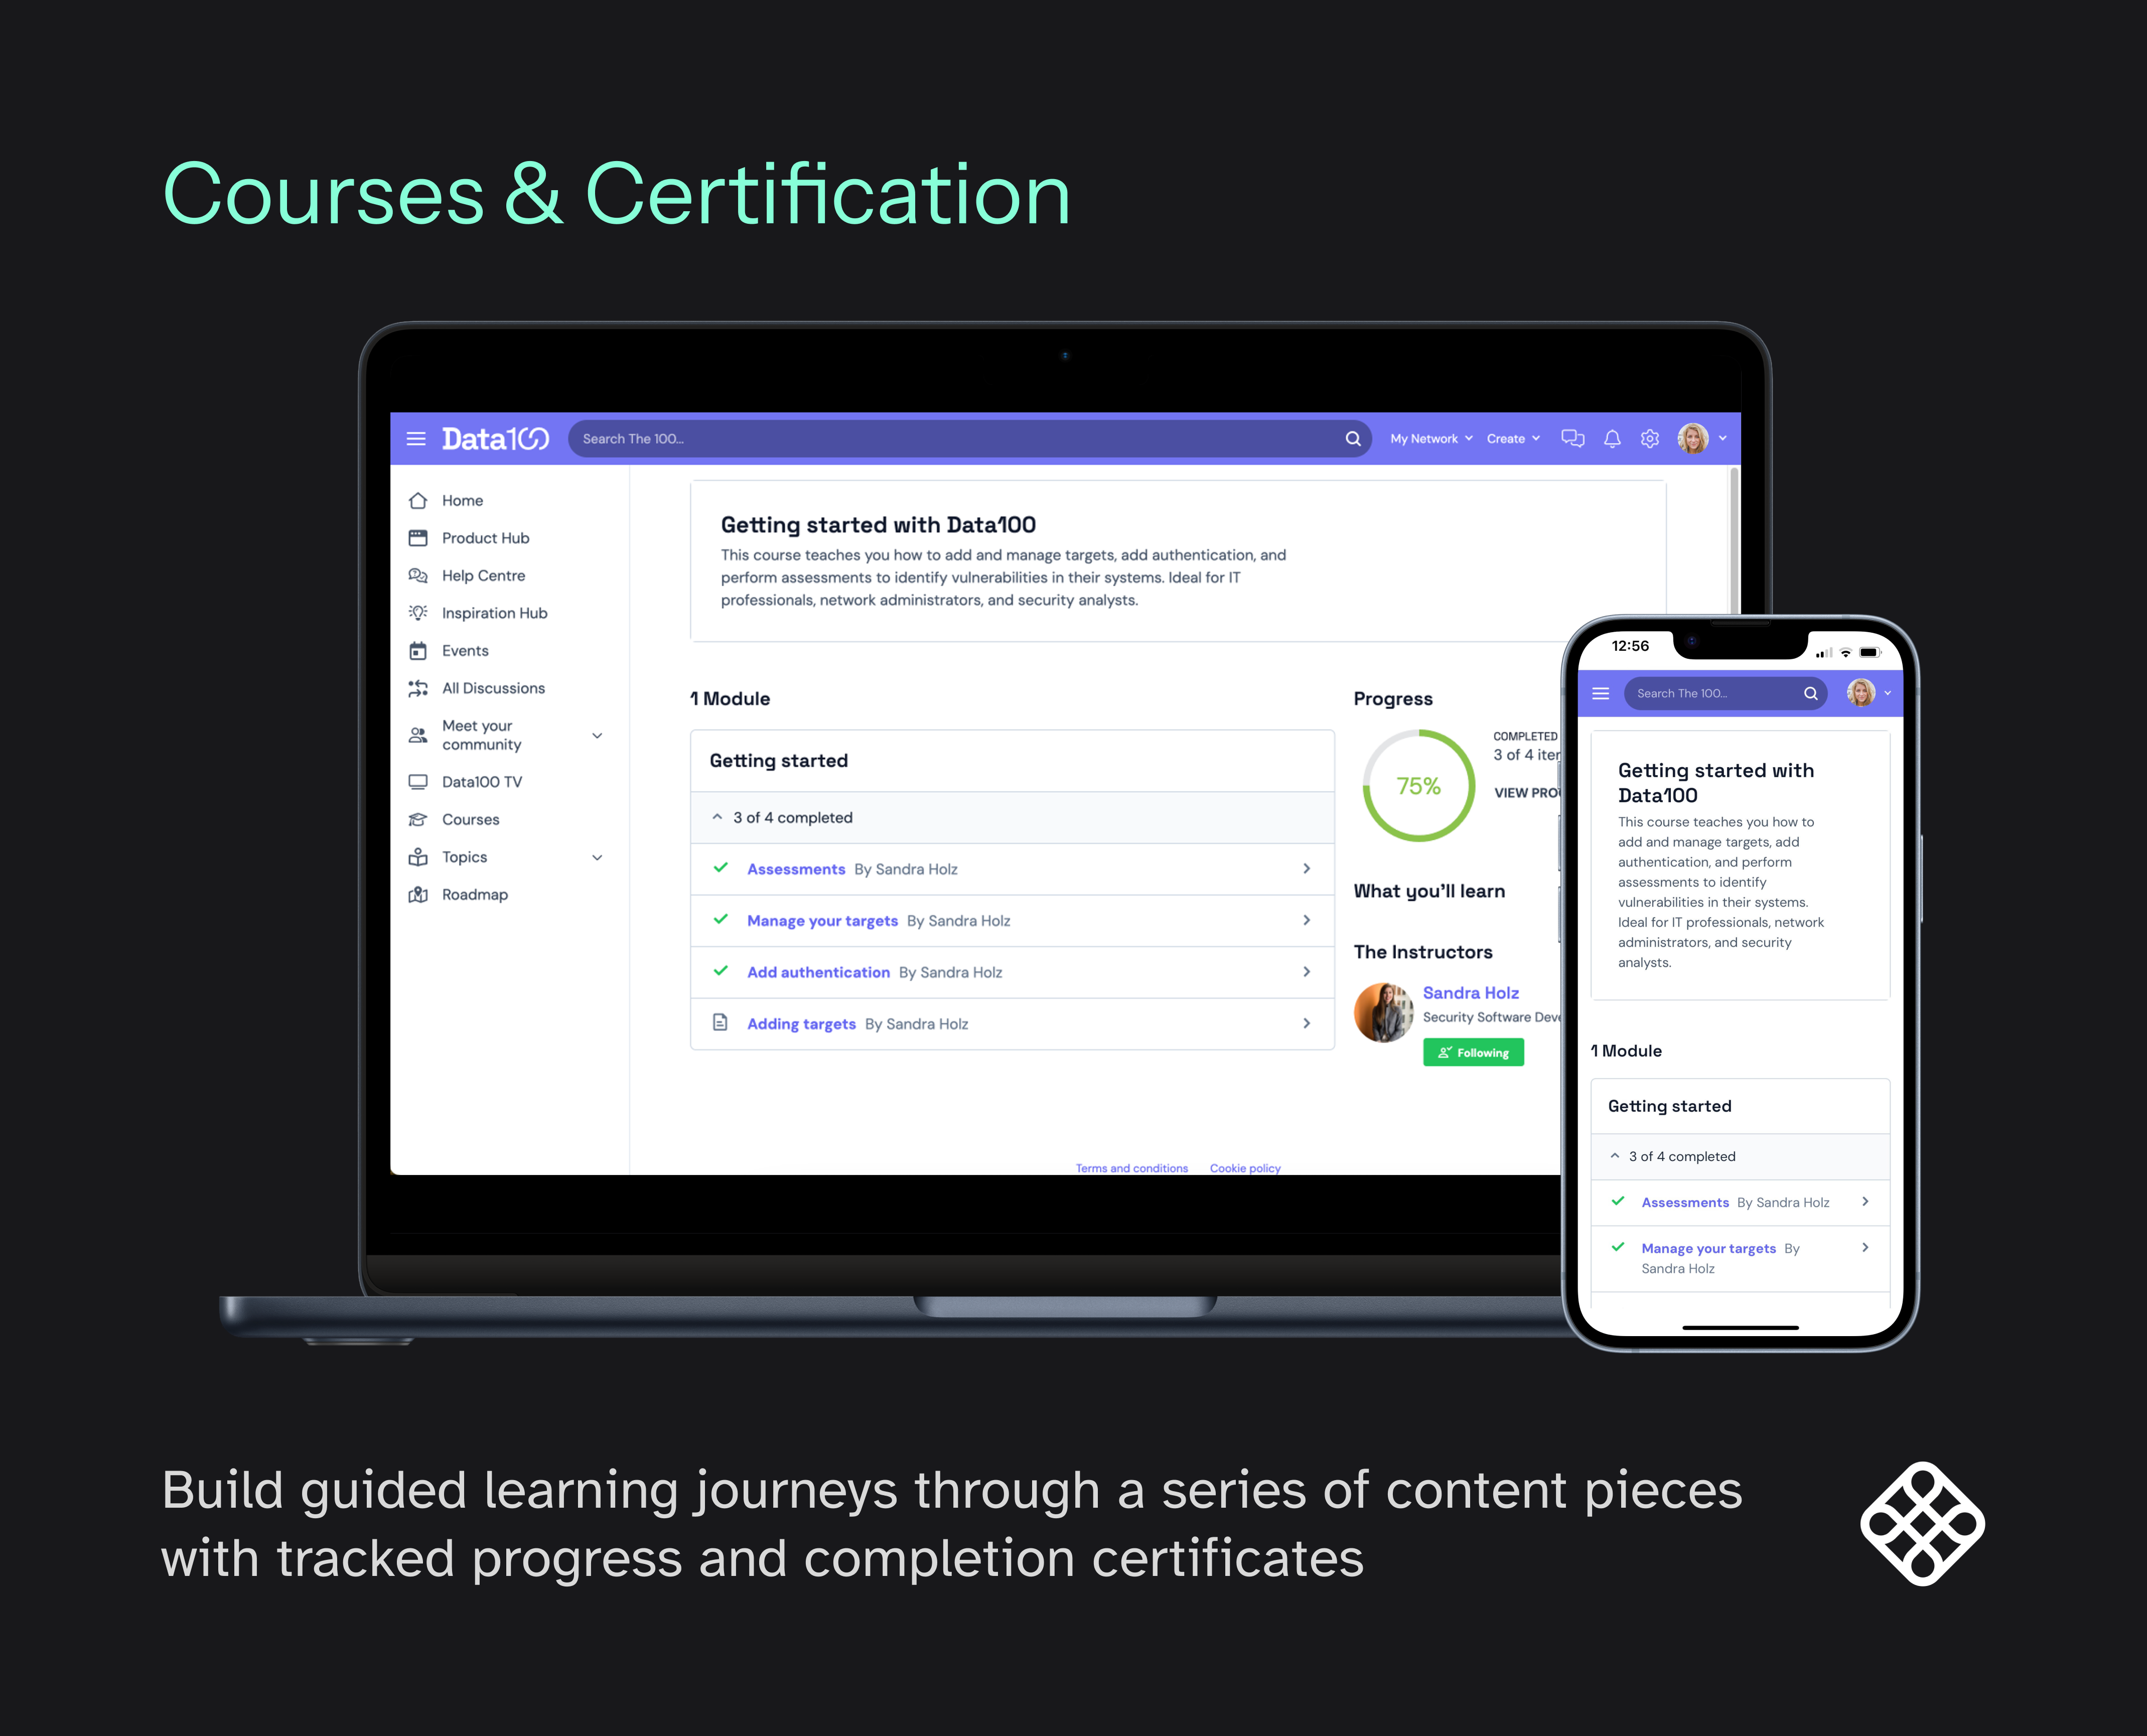 Build guided learning journeys through a series of content pieces with tracked progress and completion certificates